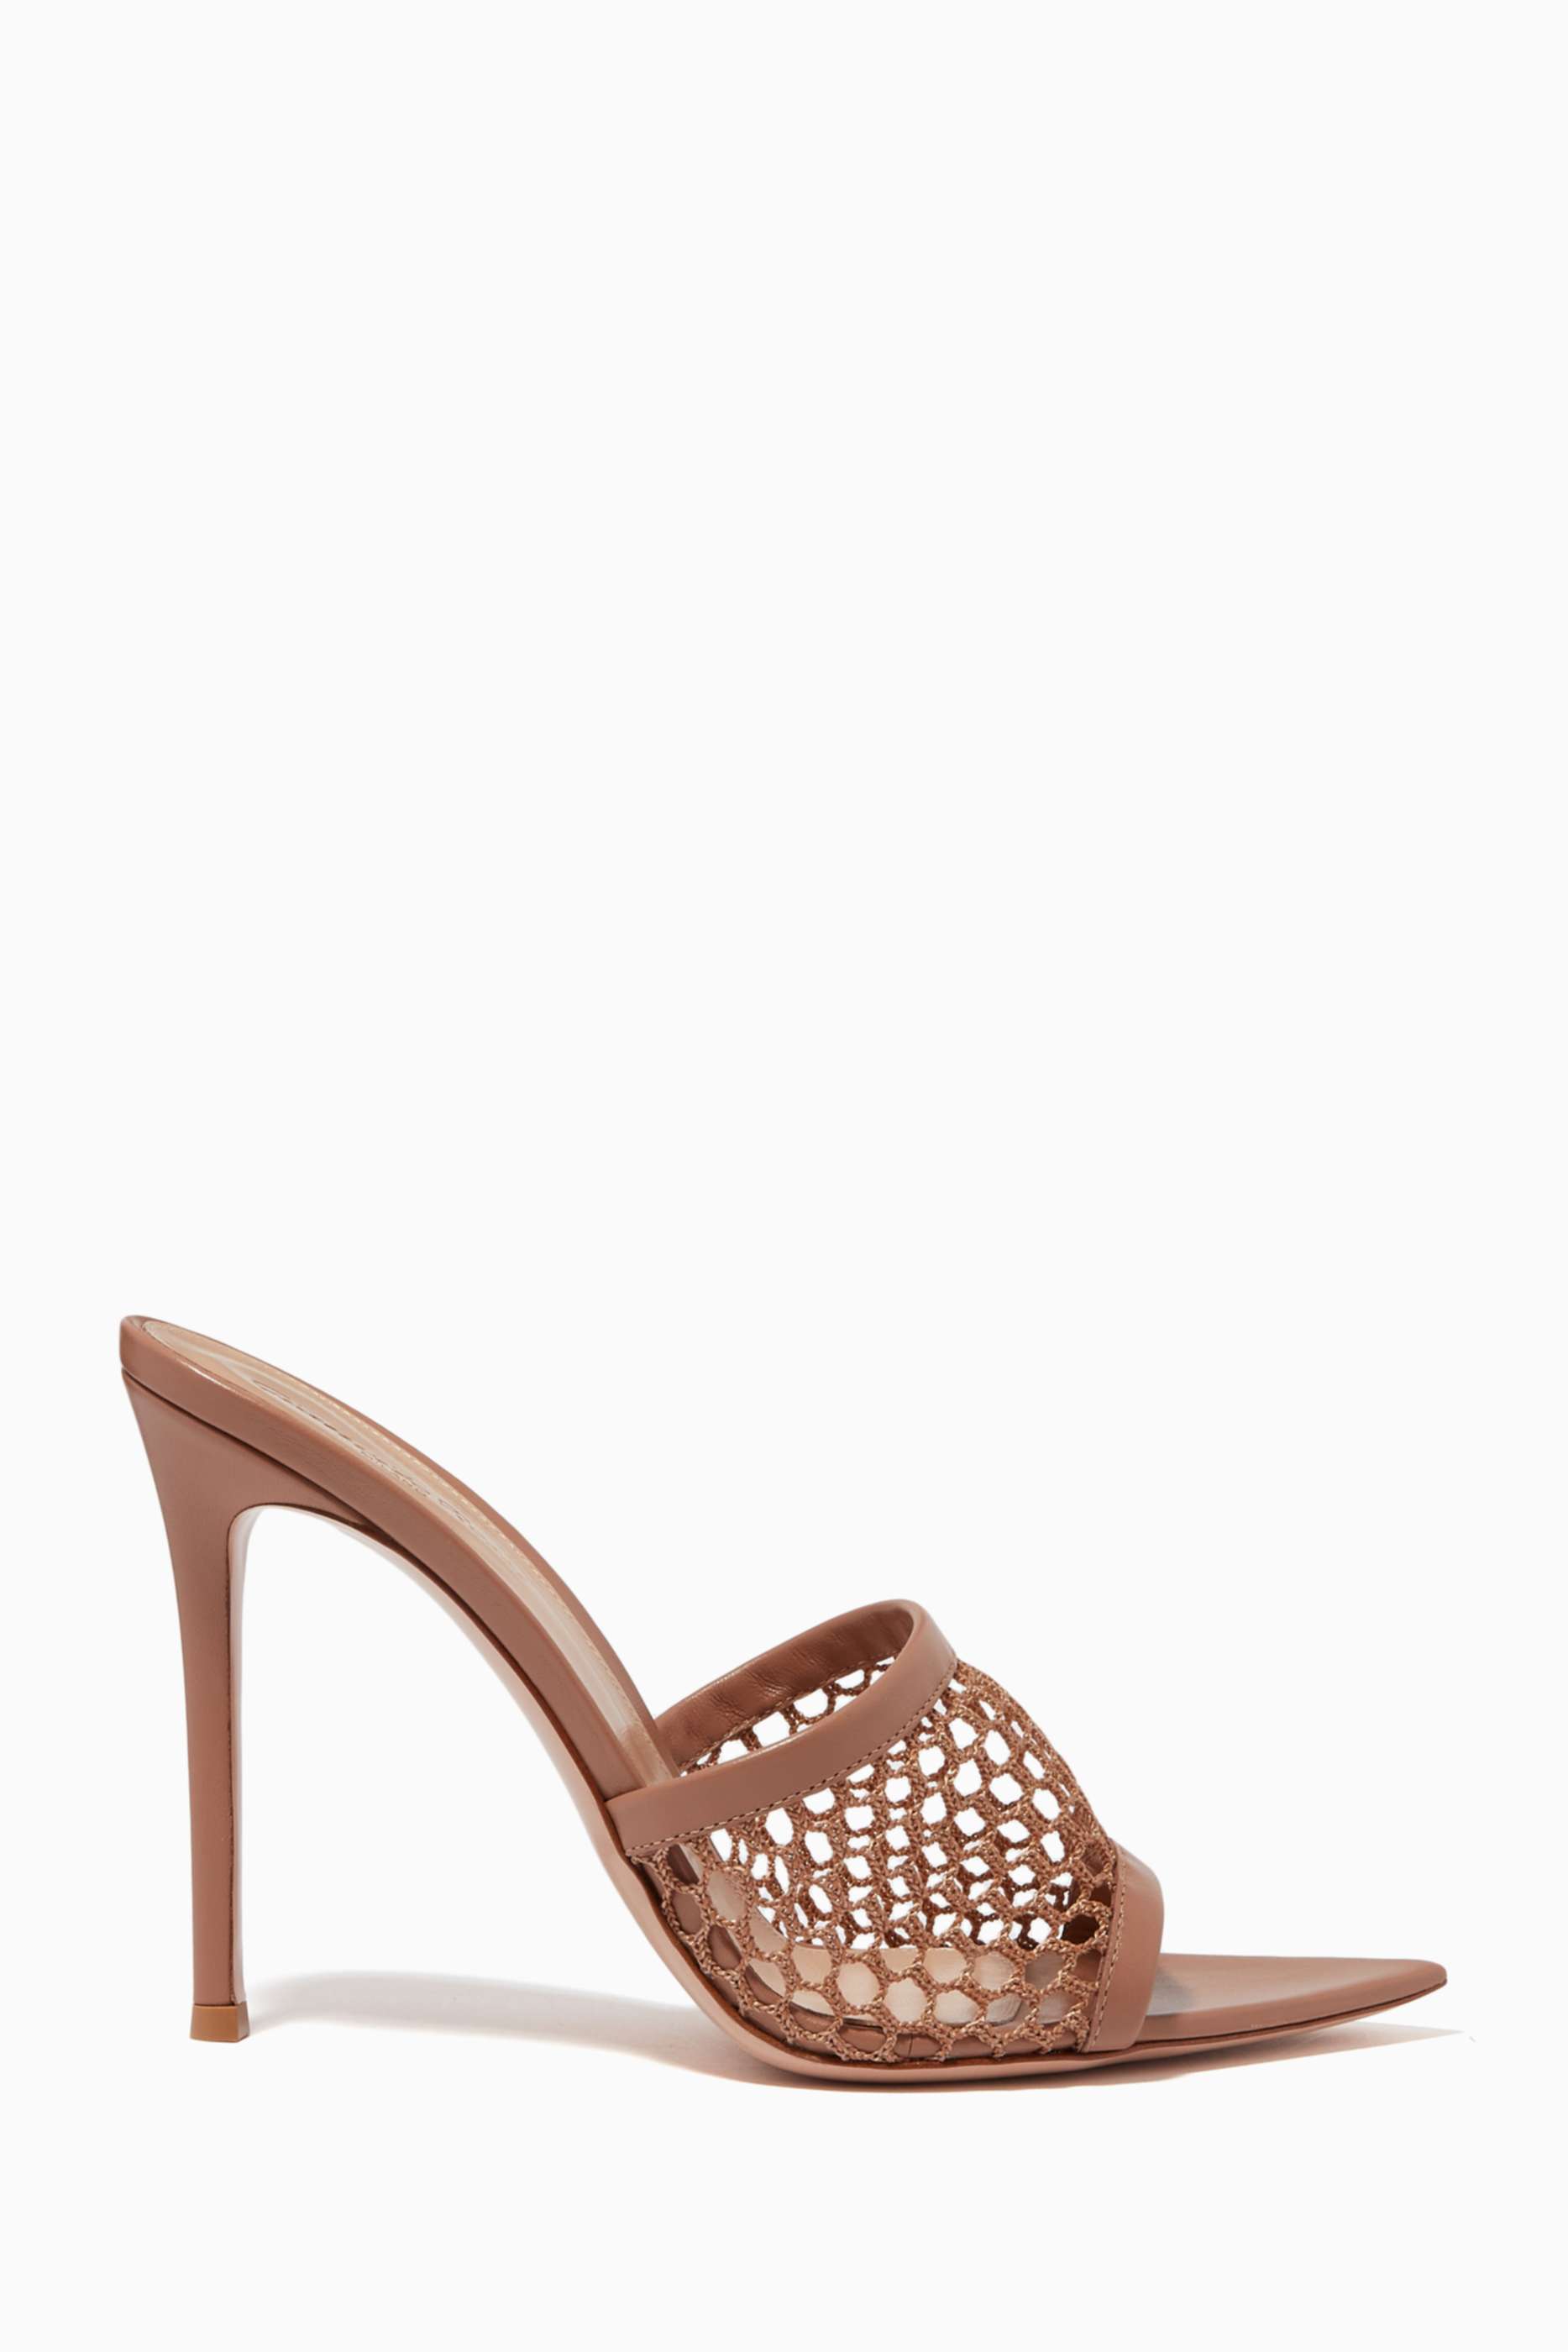 Shop Luxury Gianvito Rossi Shoes for Women Online | Ounass UAE